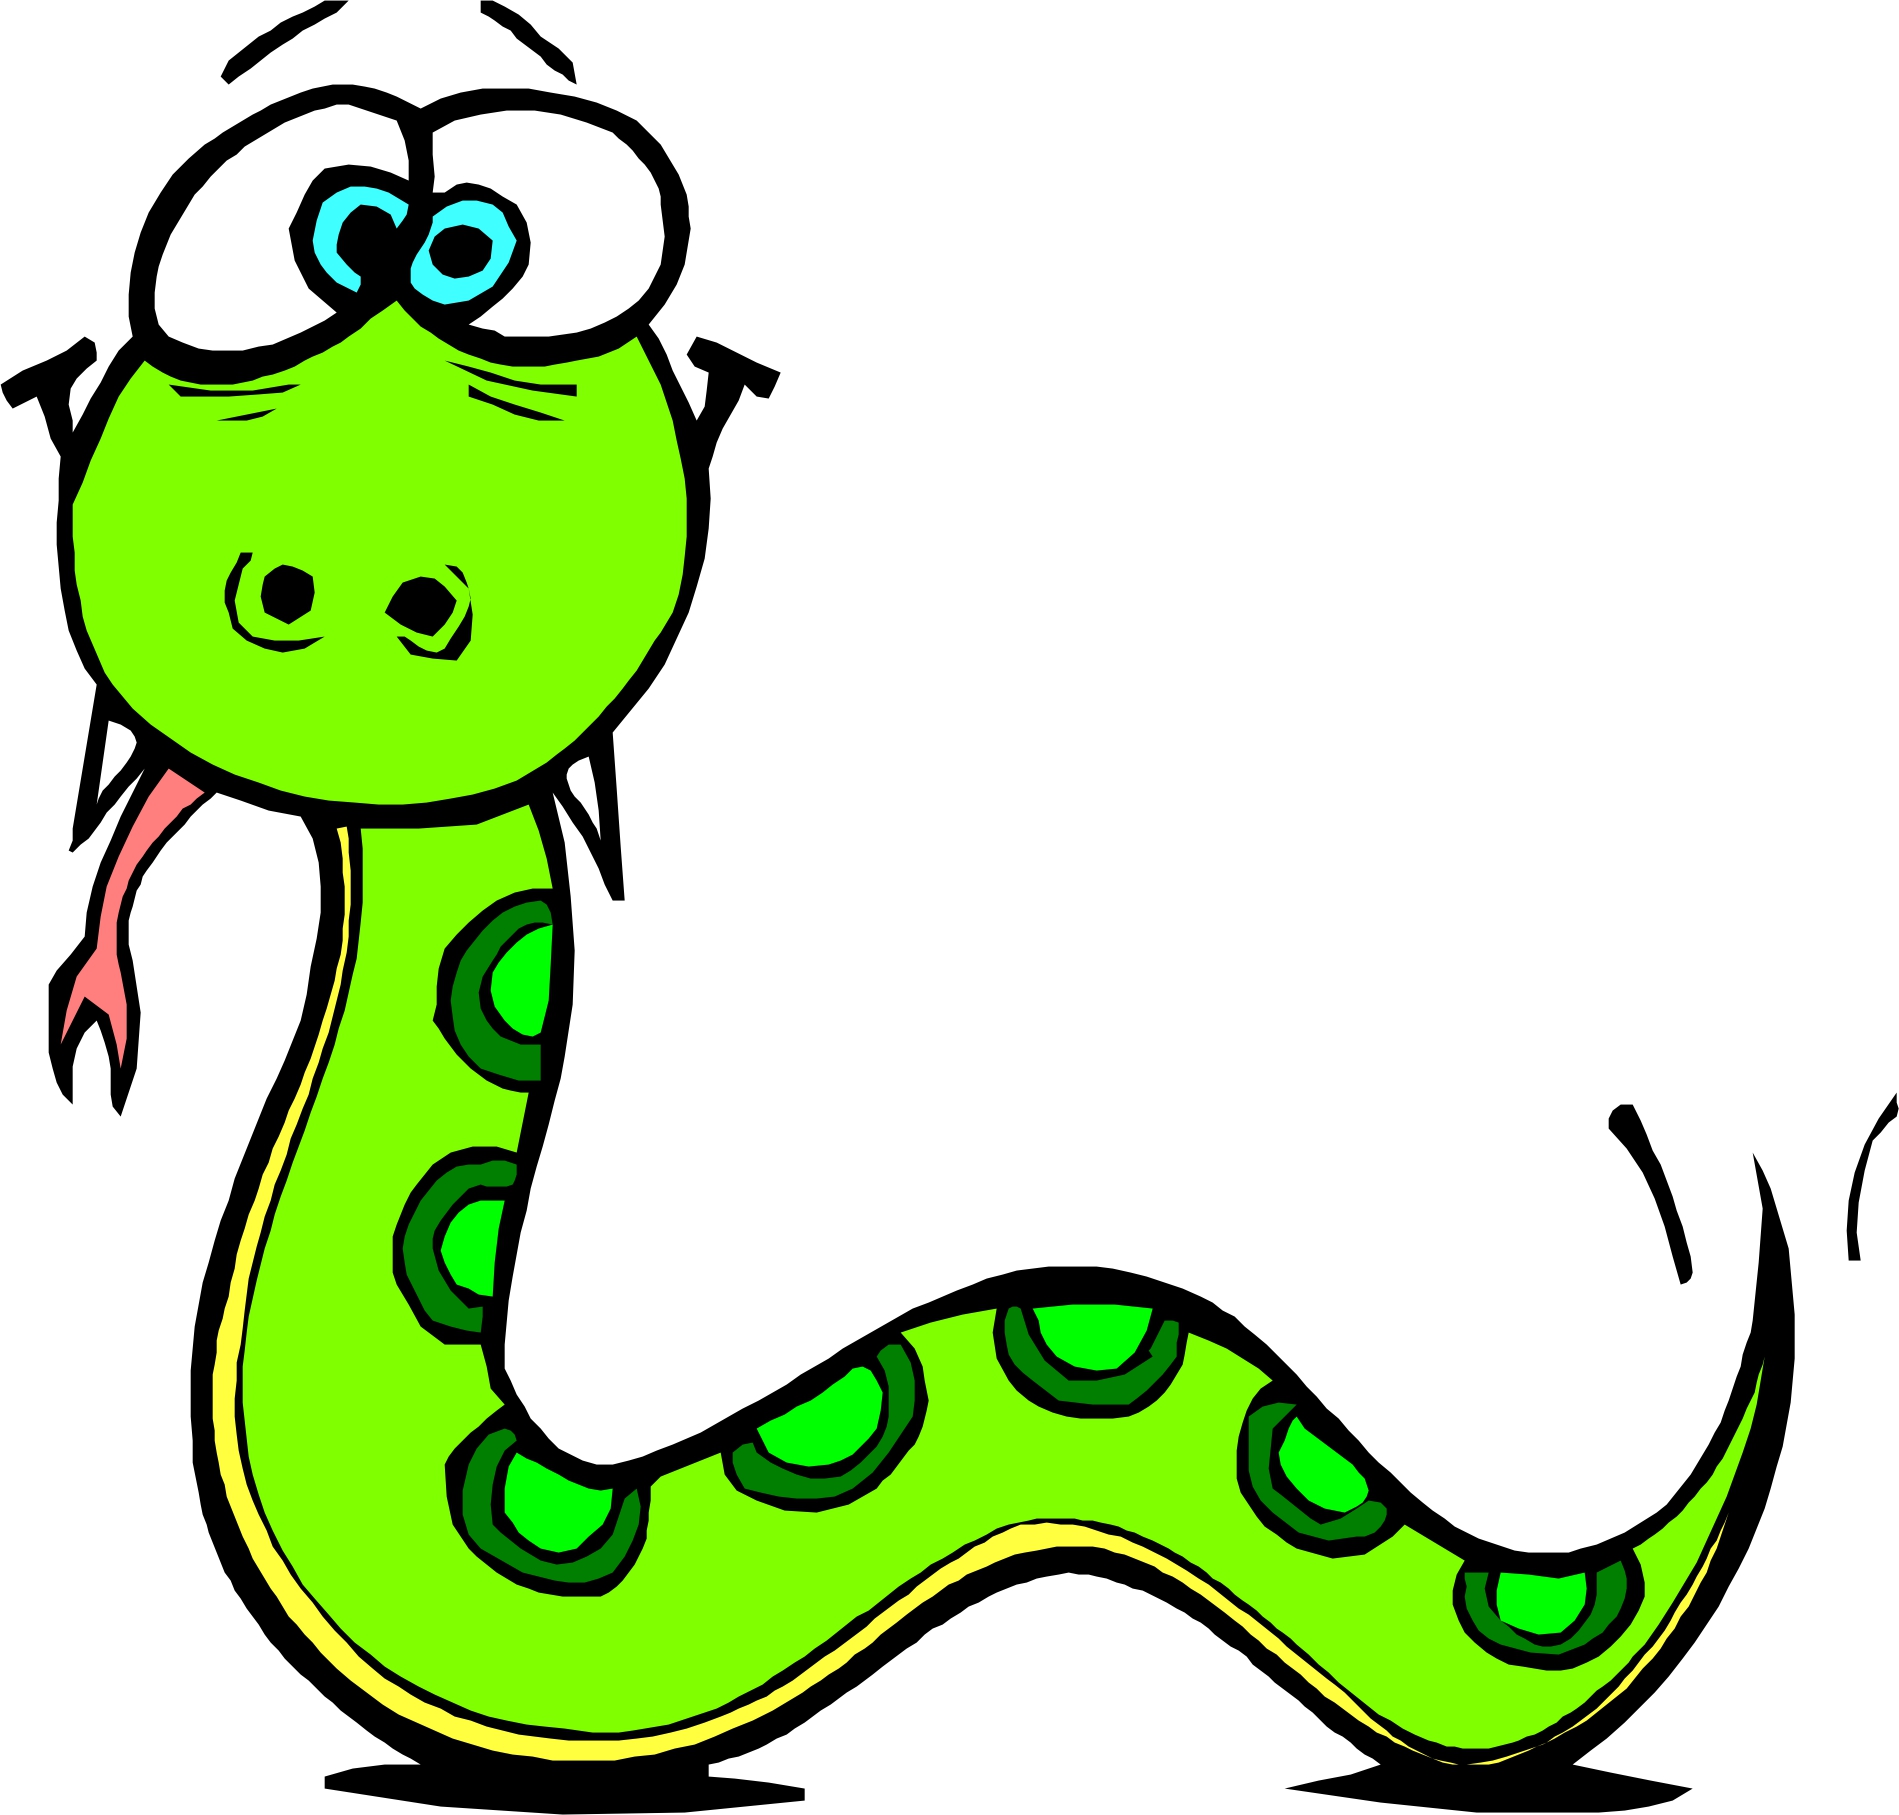 Cartoon Snake | Page 2 - Clipart library - Clipart library